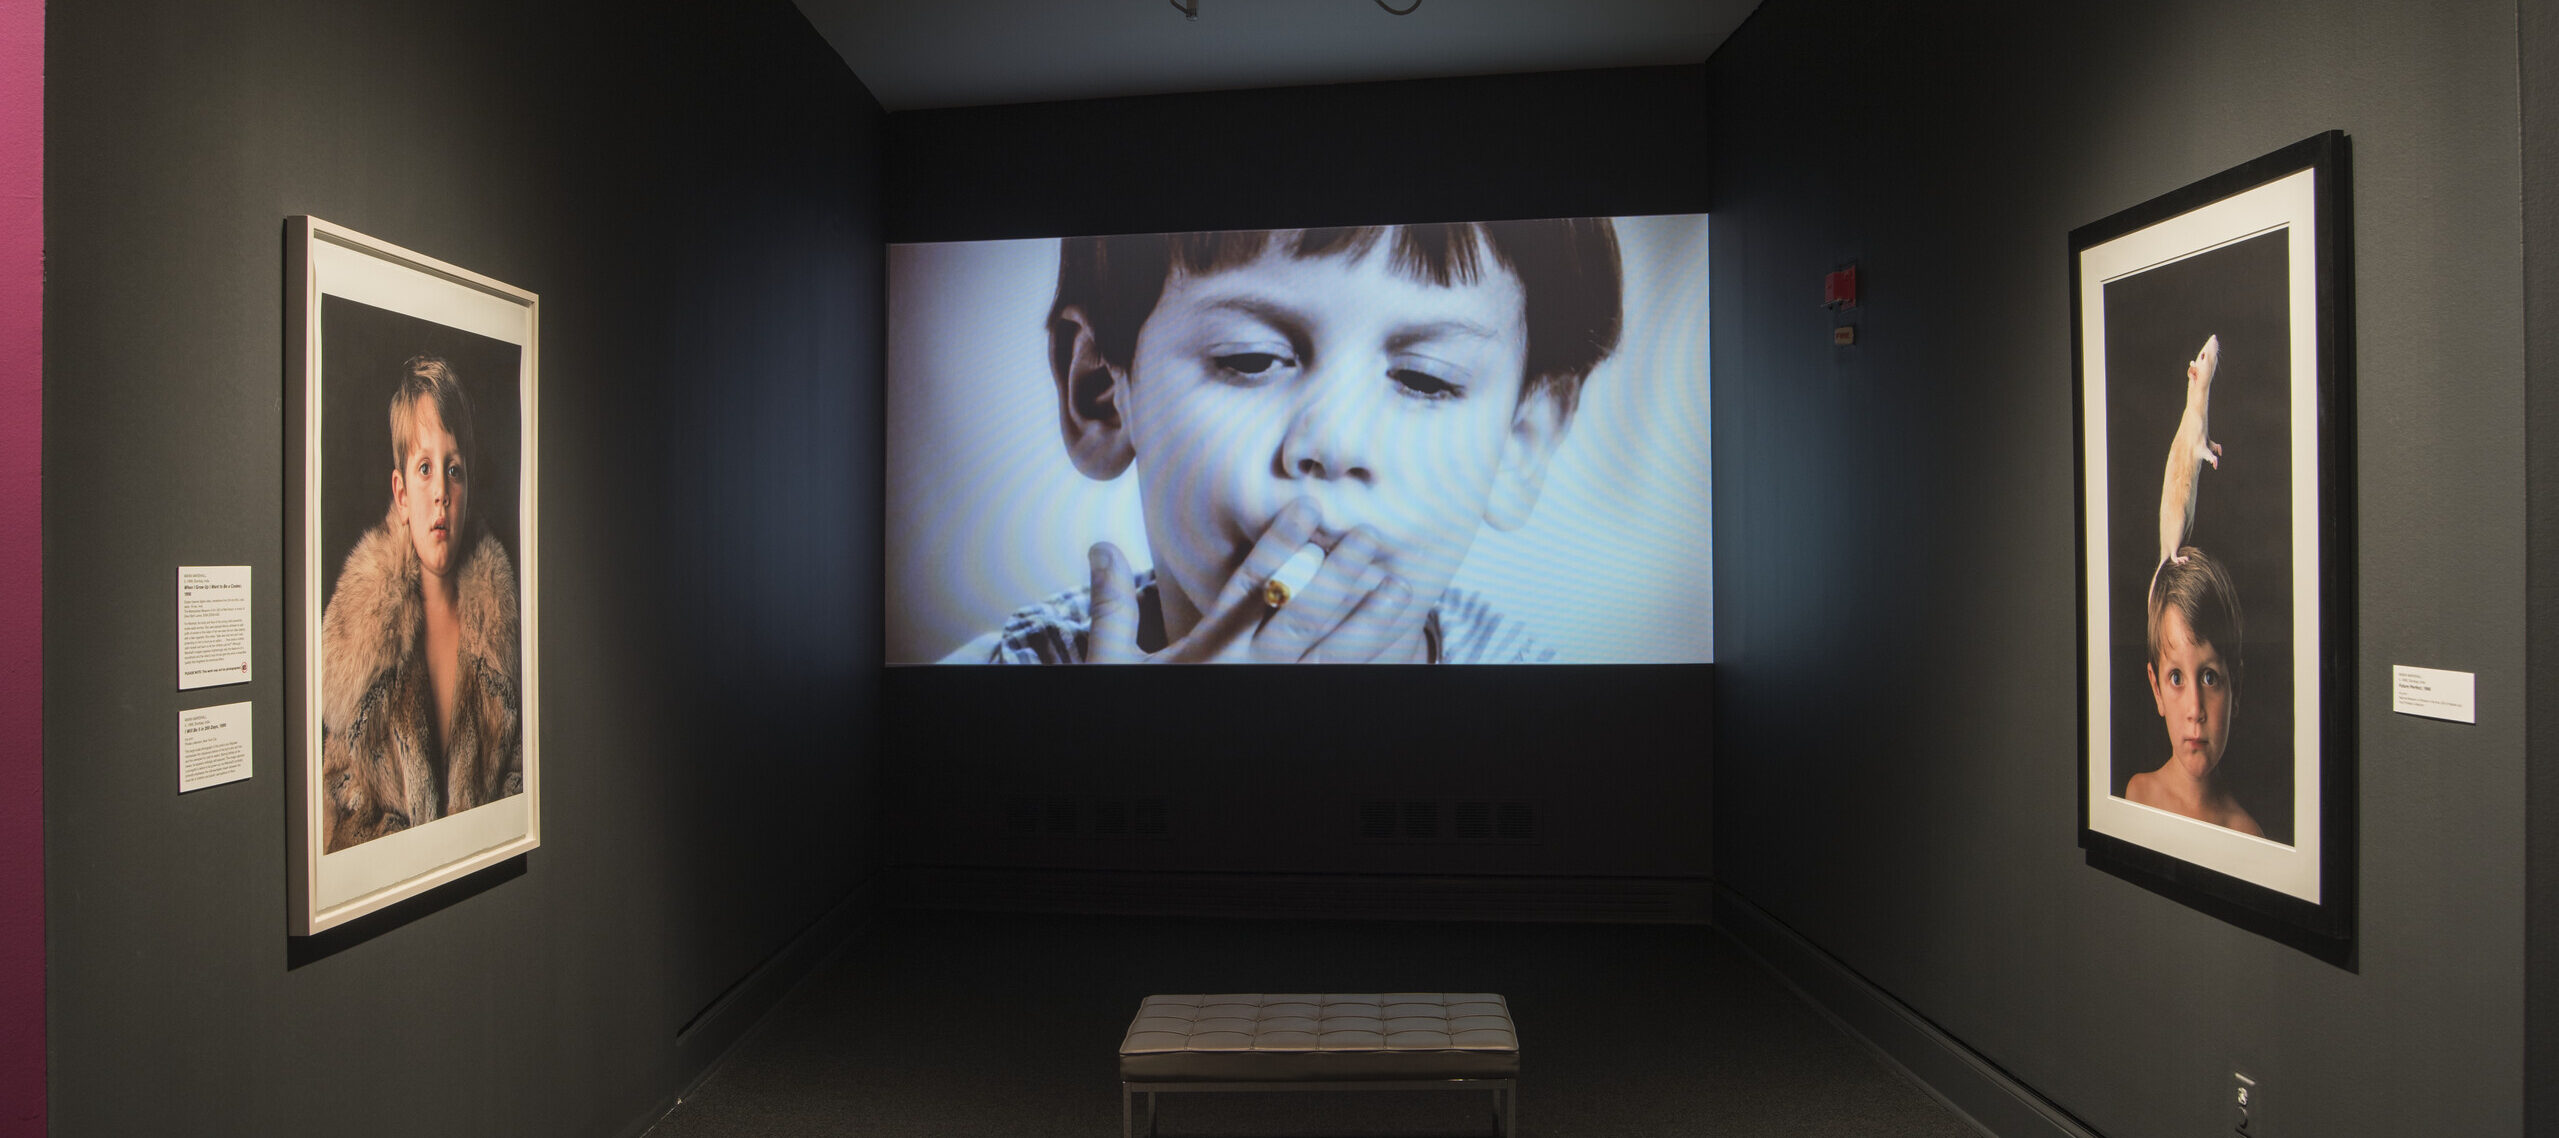 A video screen showing a little boy with a light skin tone smoking is framed by two photographs showing the same boy wearing a fur and with a rat on his head.